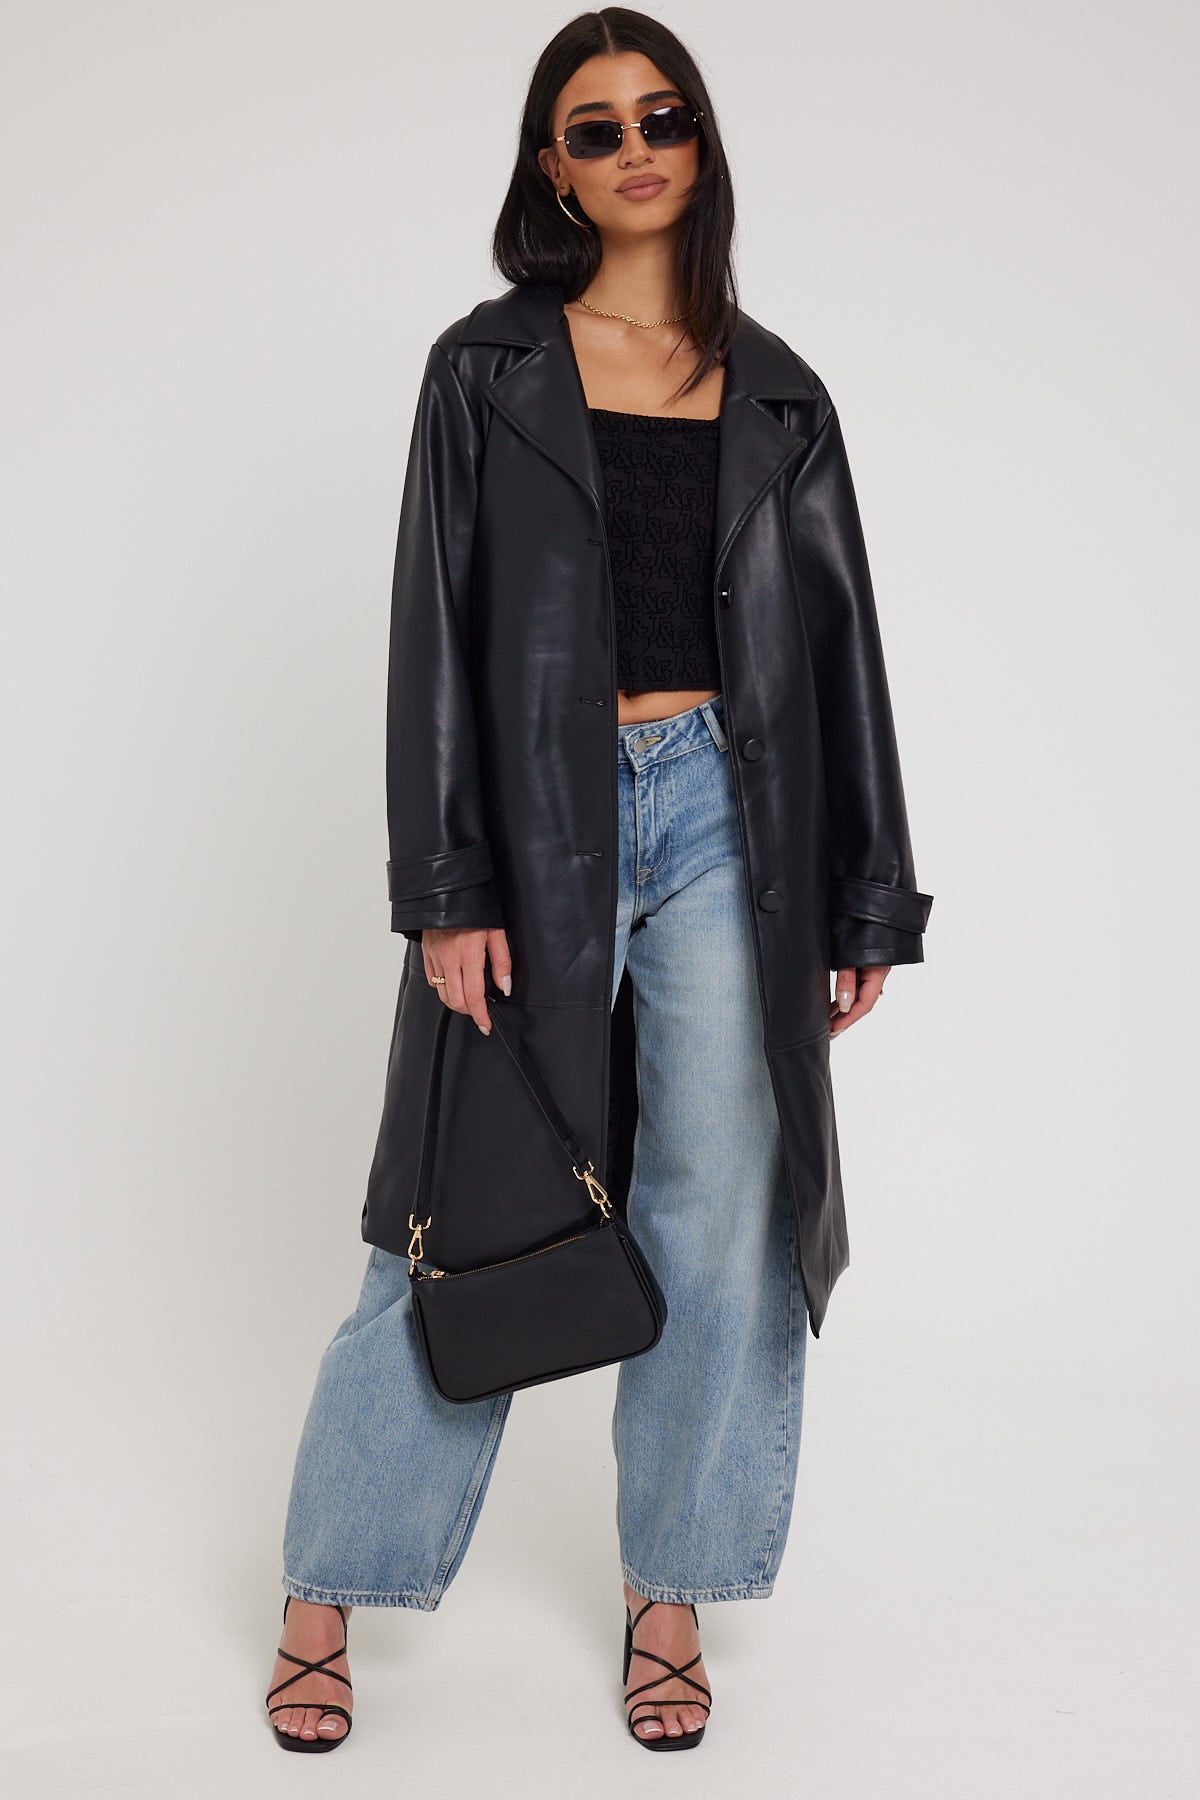 Luck & Trouble PU Trench Coat Black